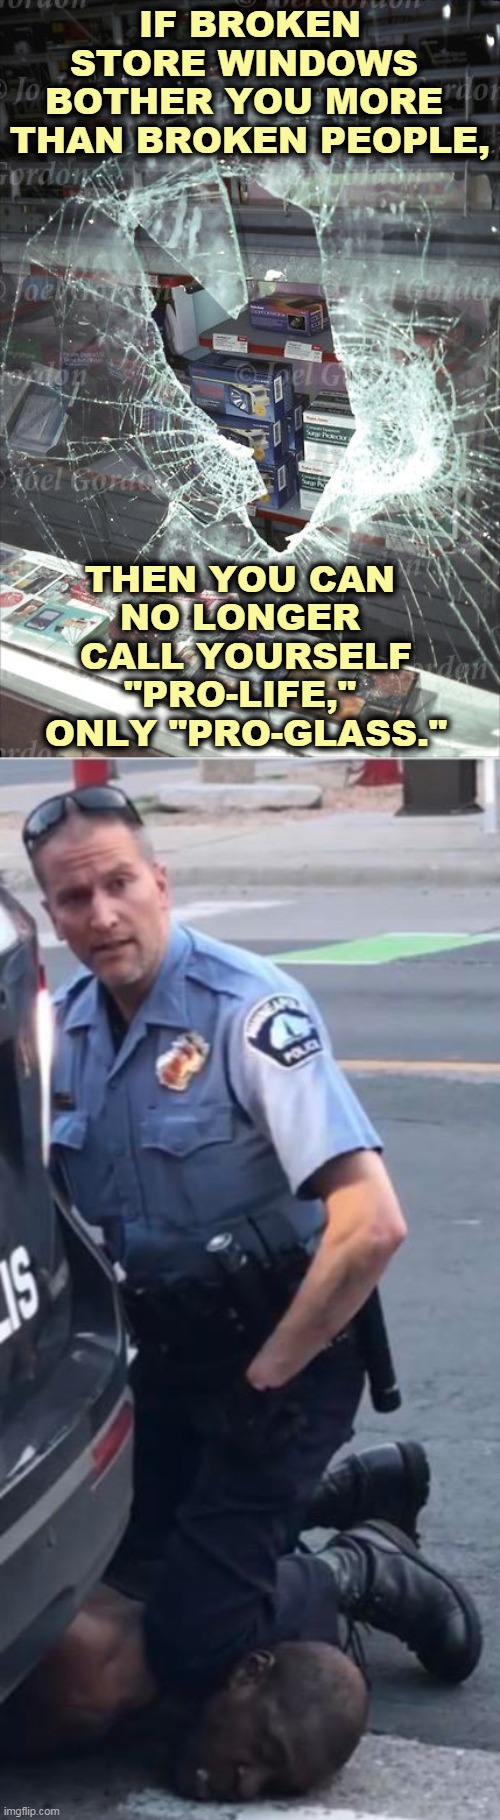 What really matters to you? | IF BROKEN STORE WINDOWS 
BOTHER YOU MORE 
THAN BROKEN PEOPLE, THEN YOU CAN 
NO LONGER 
CALL YOURSELF "PRO-LIFE," 
ONLY "PRO-GLASS." | image tagged in ofc derek chauvin,glass,looting,murder,death | made w/ Imgflip meme maker